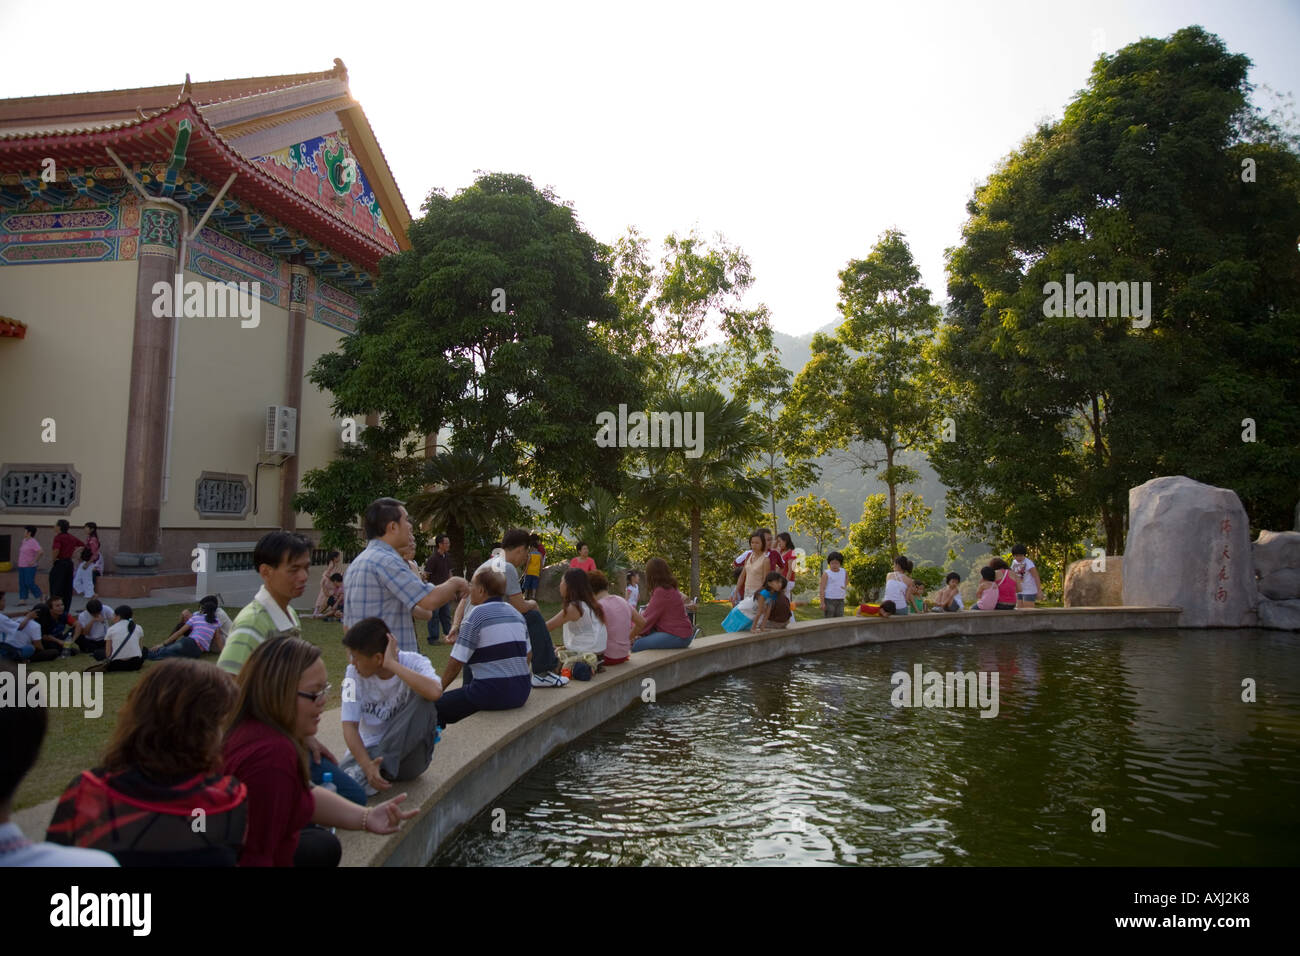 Fish pond and relaxing visitors and tourists at Kek Lok Si Temple, Georgetown, Penang Hill, Malaysia. Stock Photo